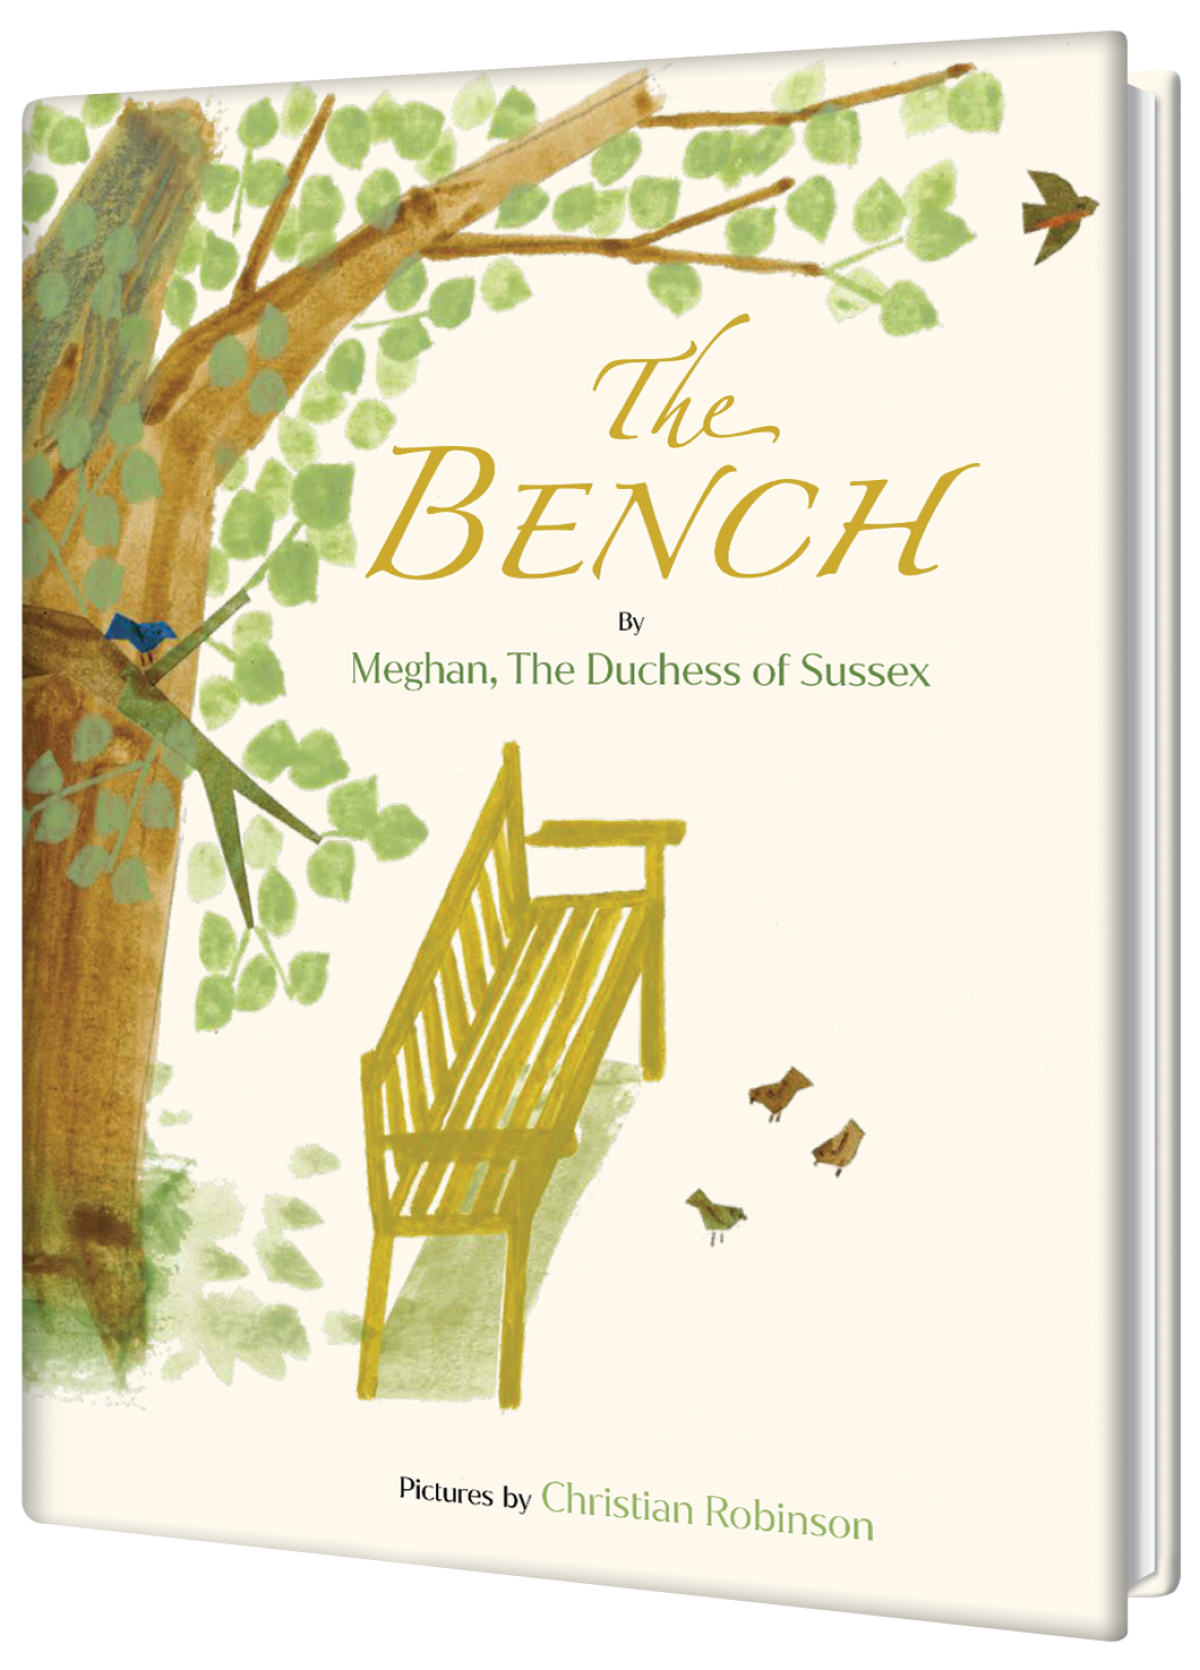 A book cover has a watercolor illustration of a tree and a bench and small birds.